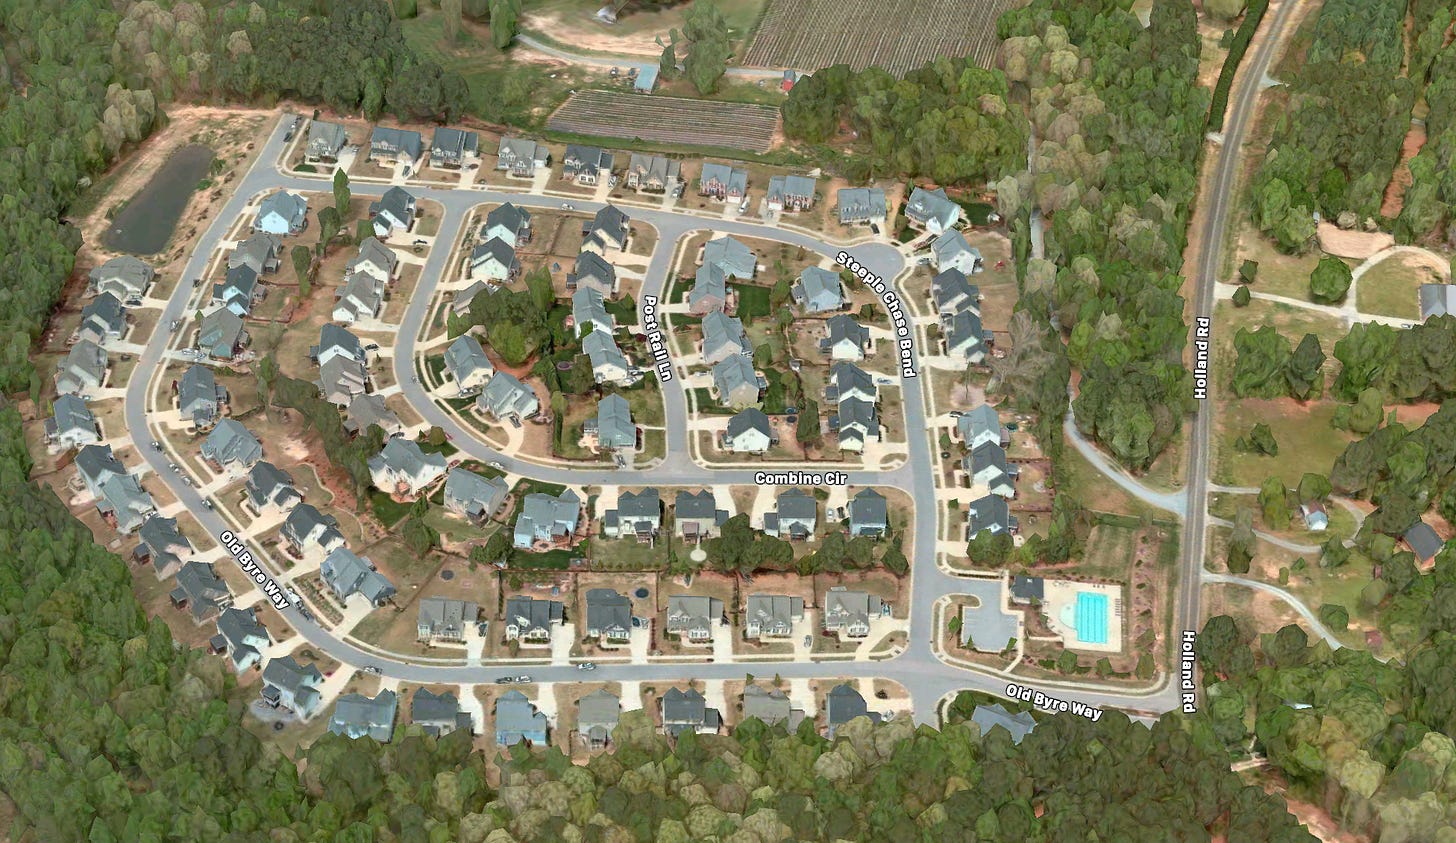 Image of a residential subdivision in Apex, taken from the air